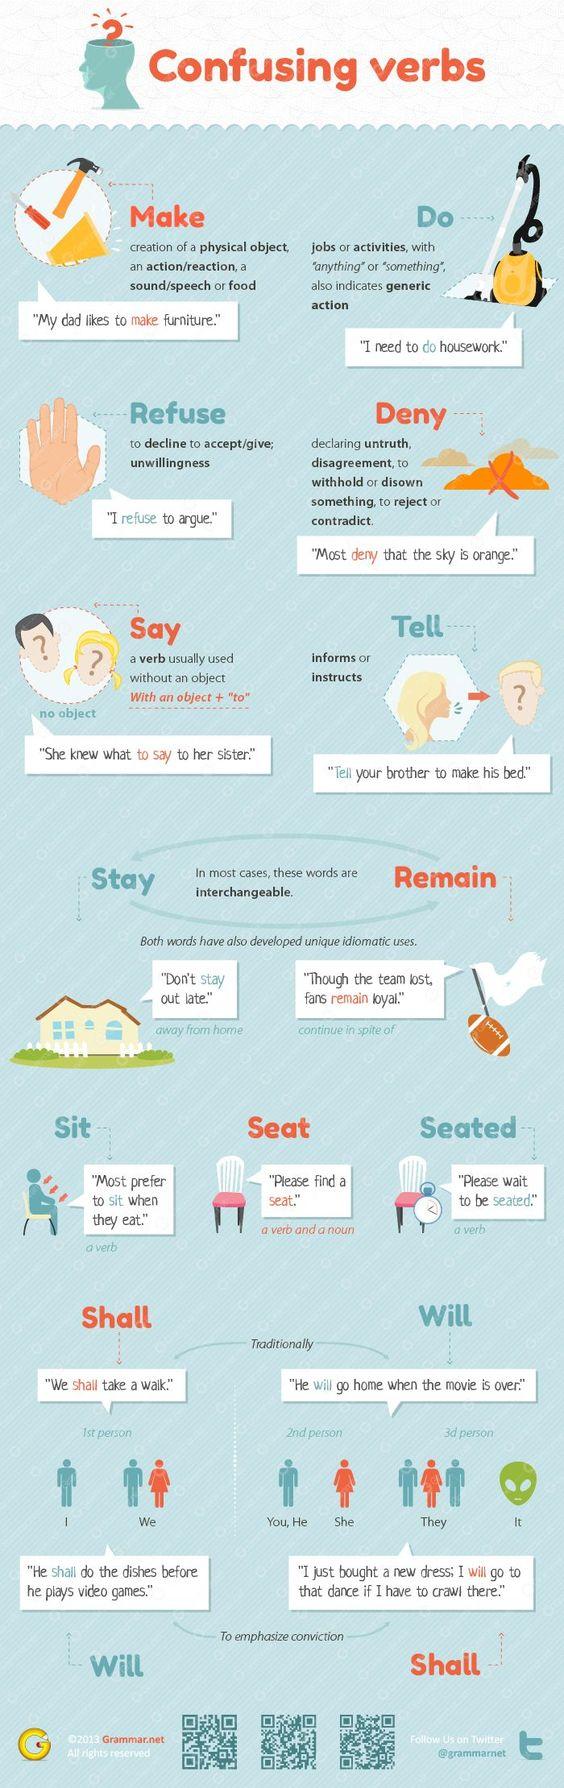 Grammar corner Confusing Verbs in English and How to Really Use Them!